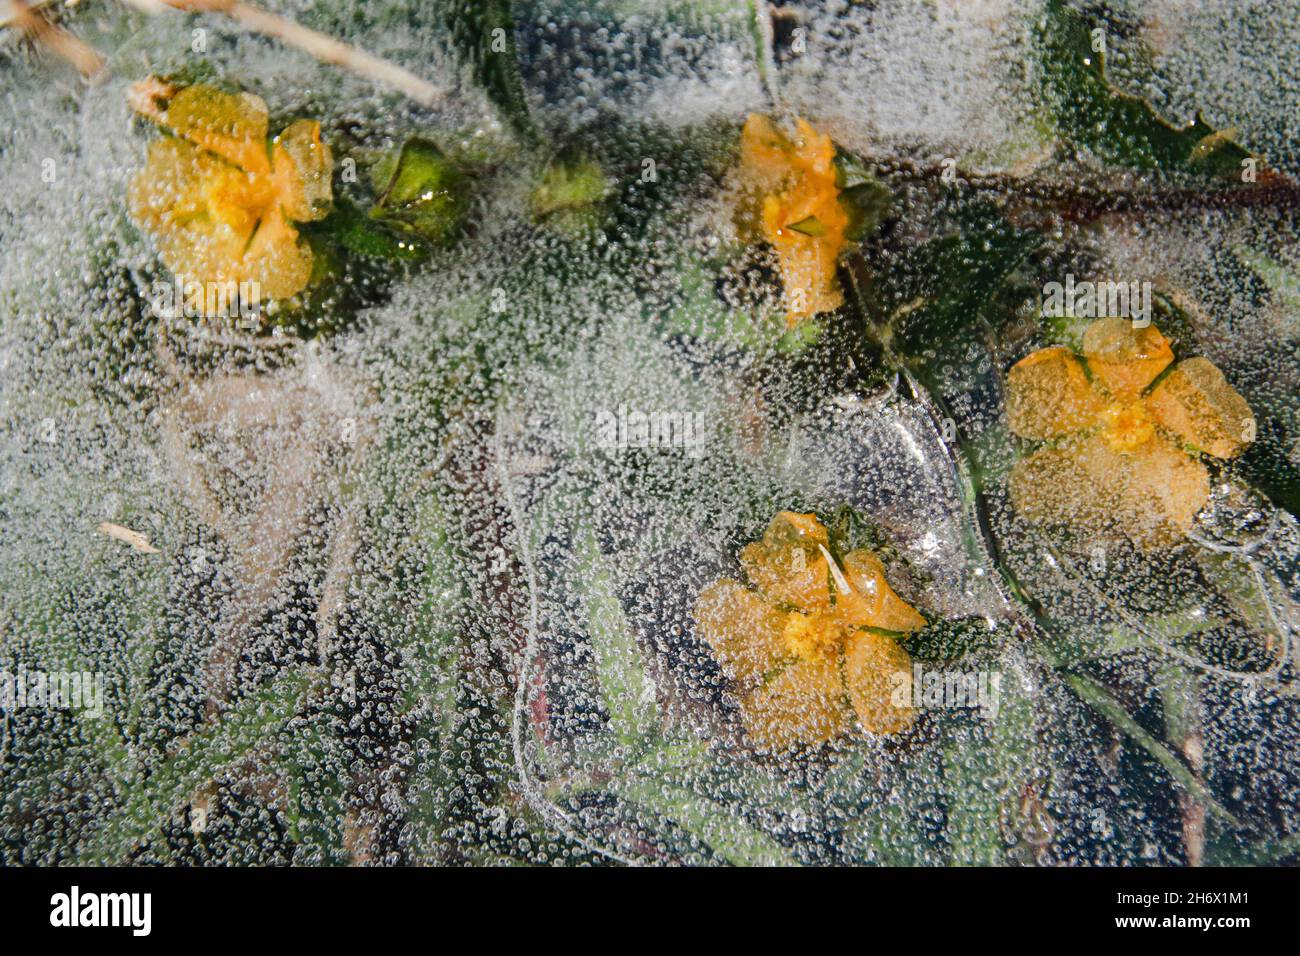 Yellow flowers trapped in the thawing ice showing the concept of Winter giving way to Spring or Seasonal Switch Stock Photo